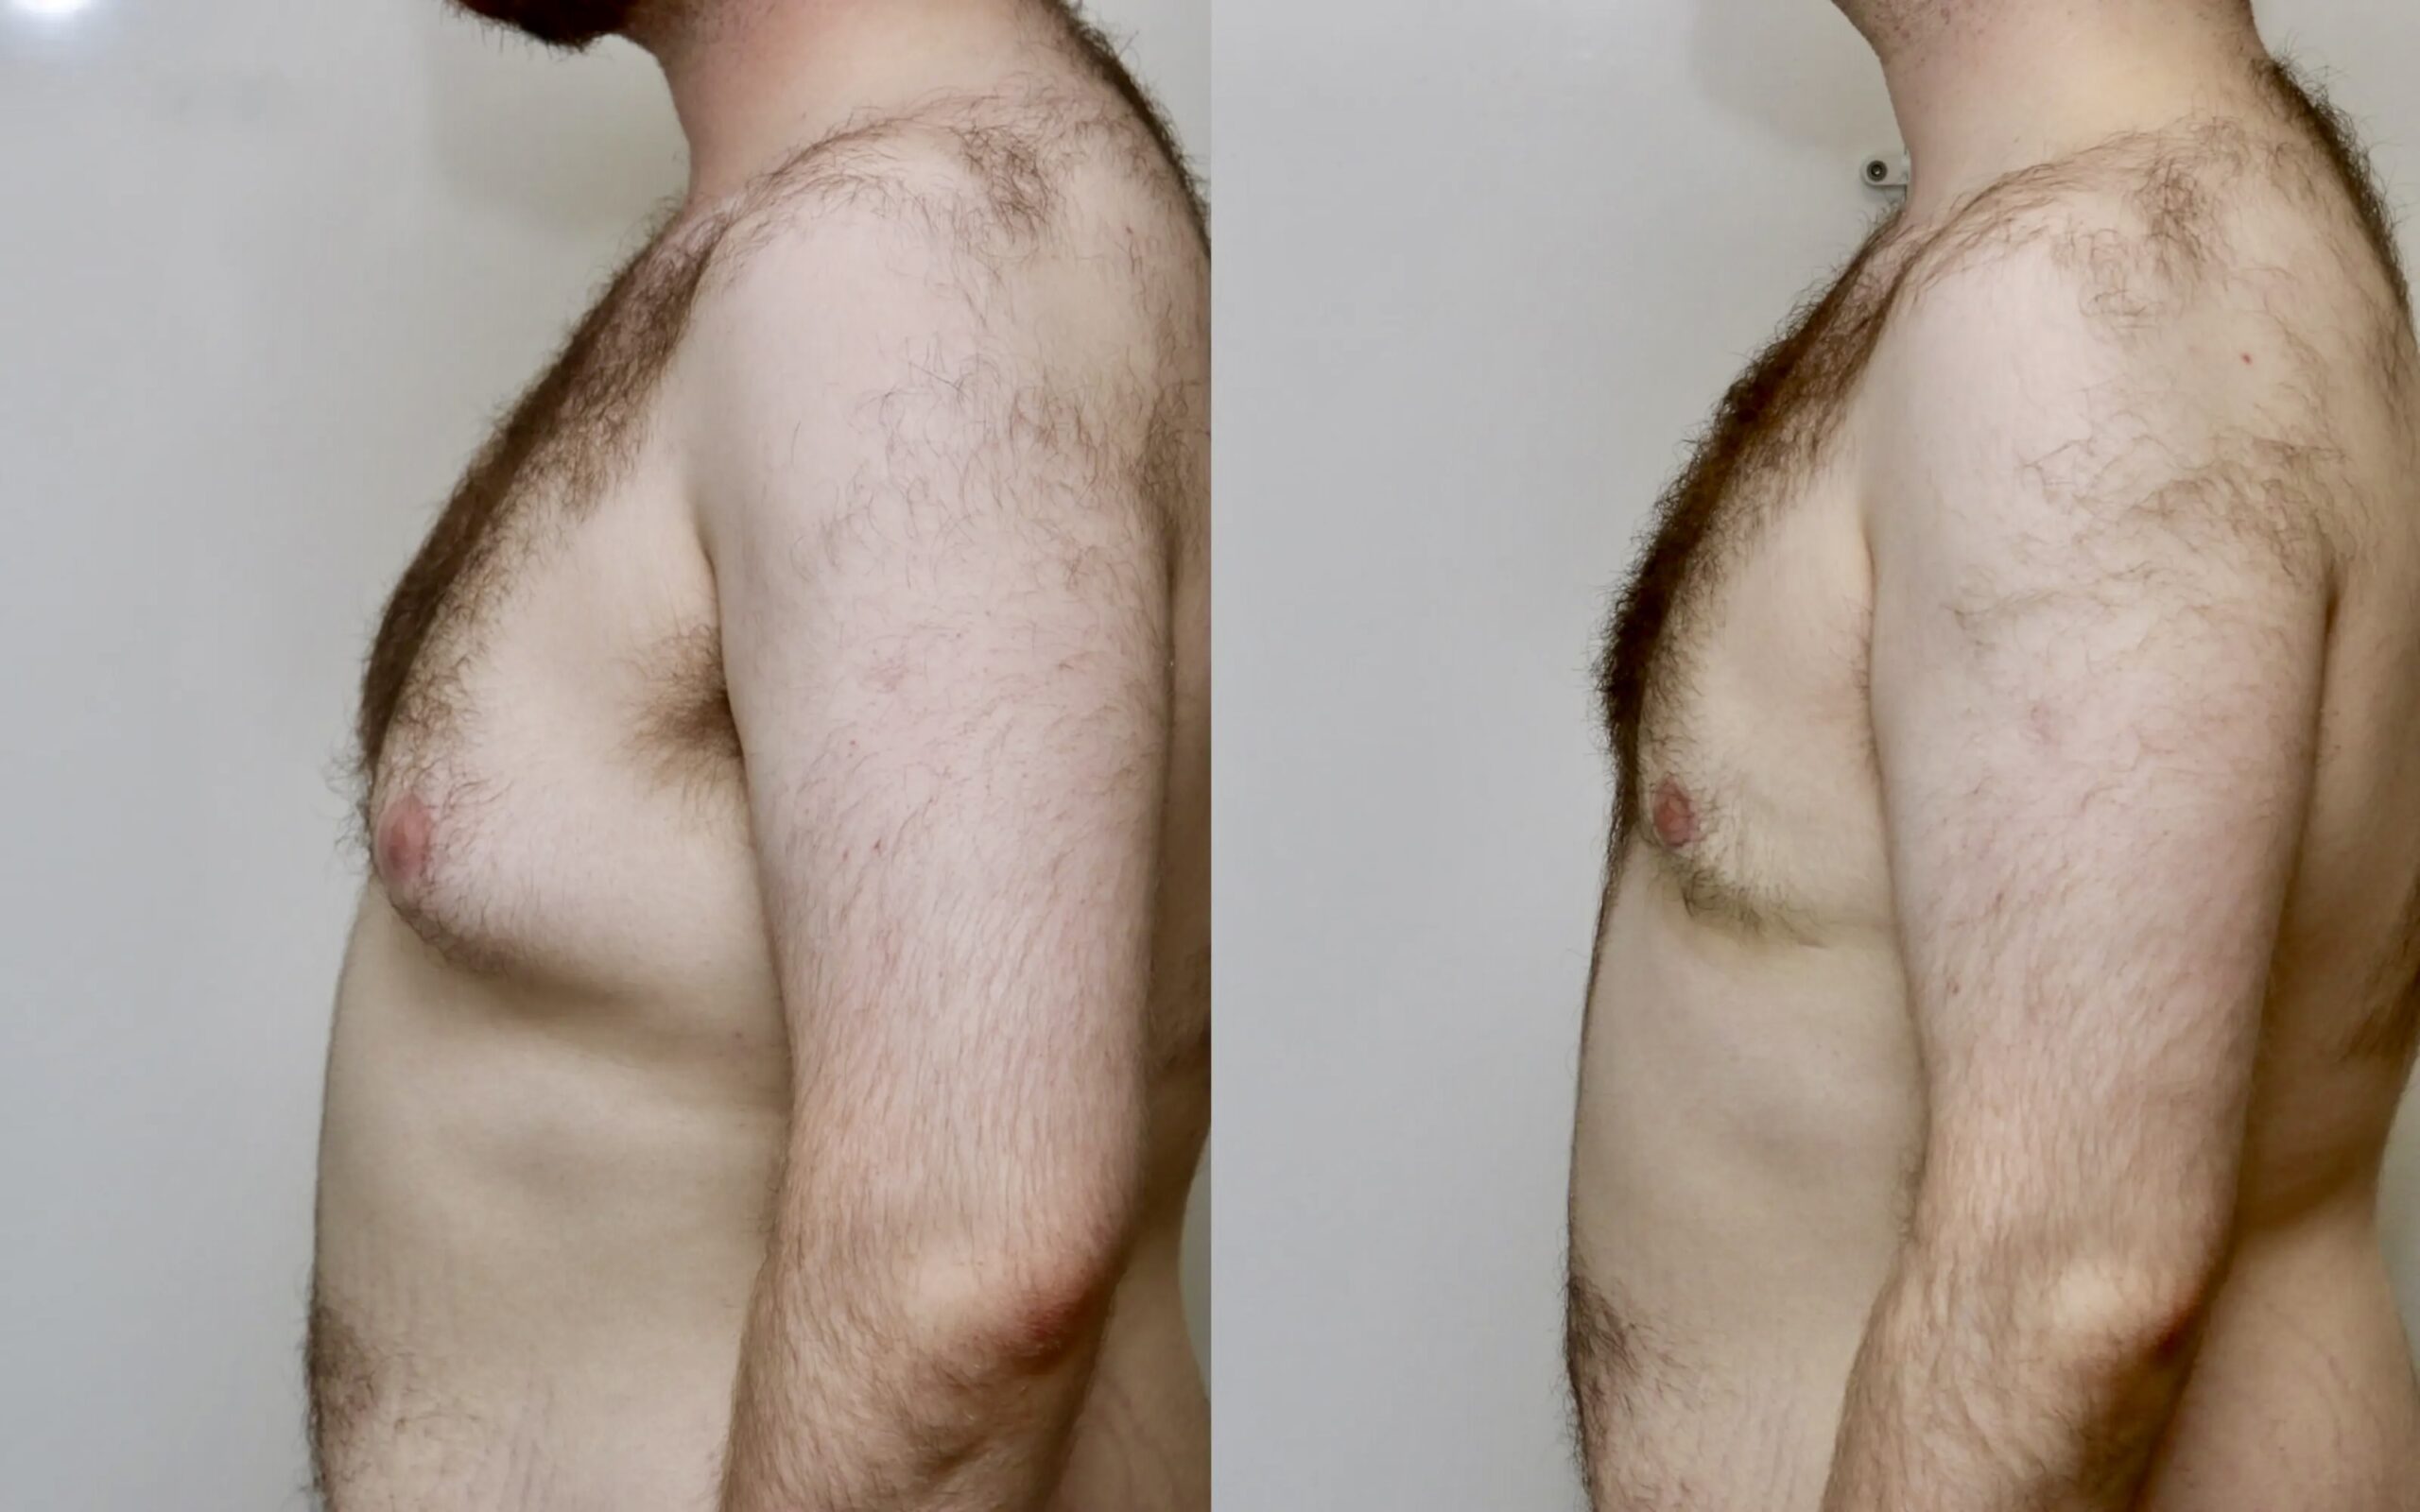 Male breast reduction before and after